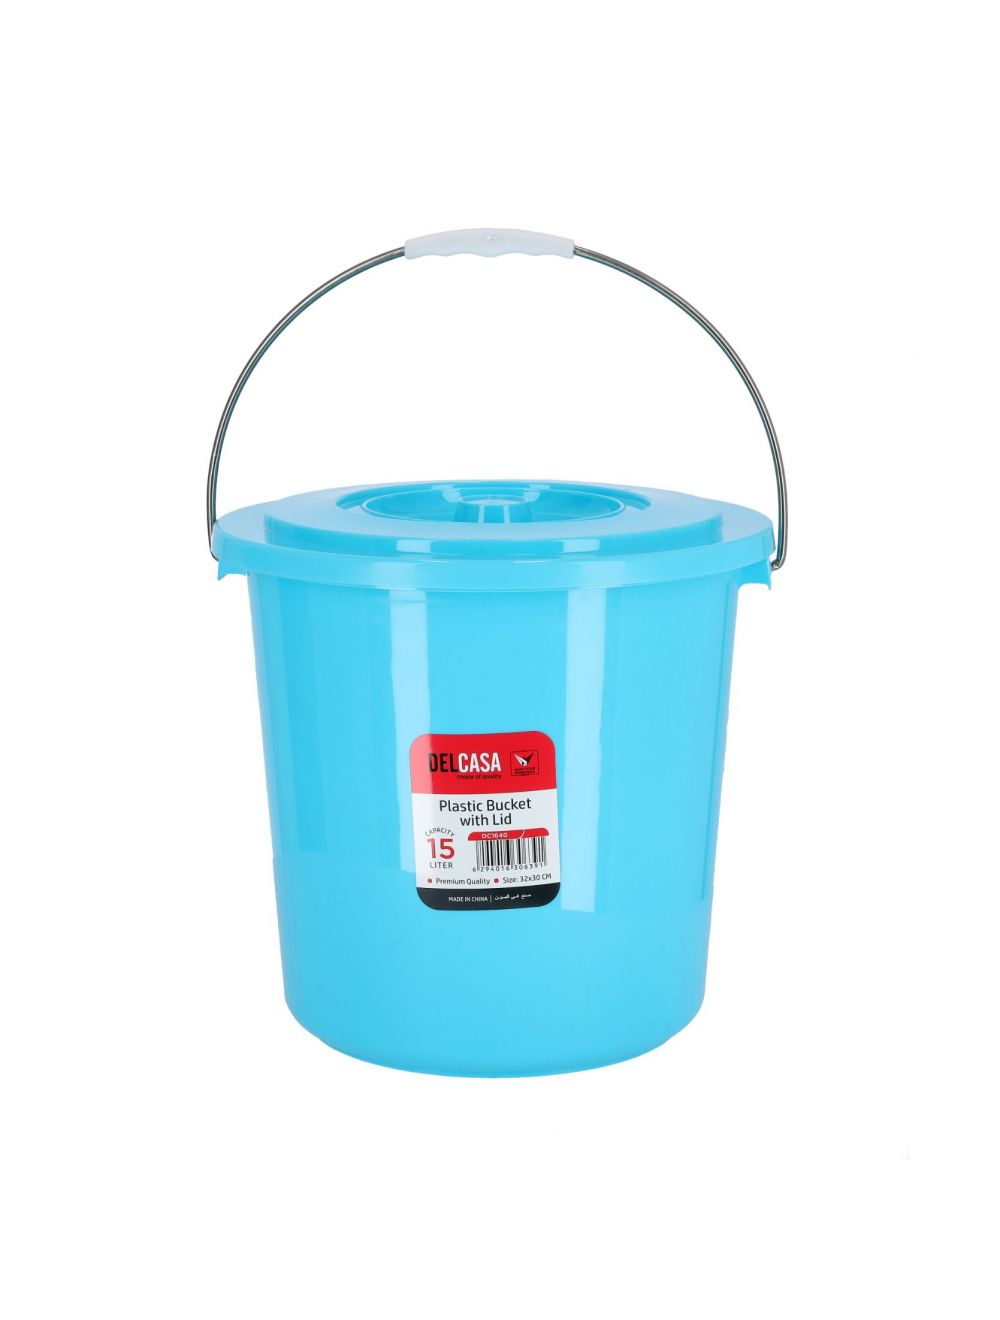 Delcasa 15Ltr Plastic Bucket with Lid - Strong Handle- Red- 15 Liter